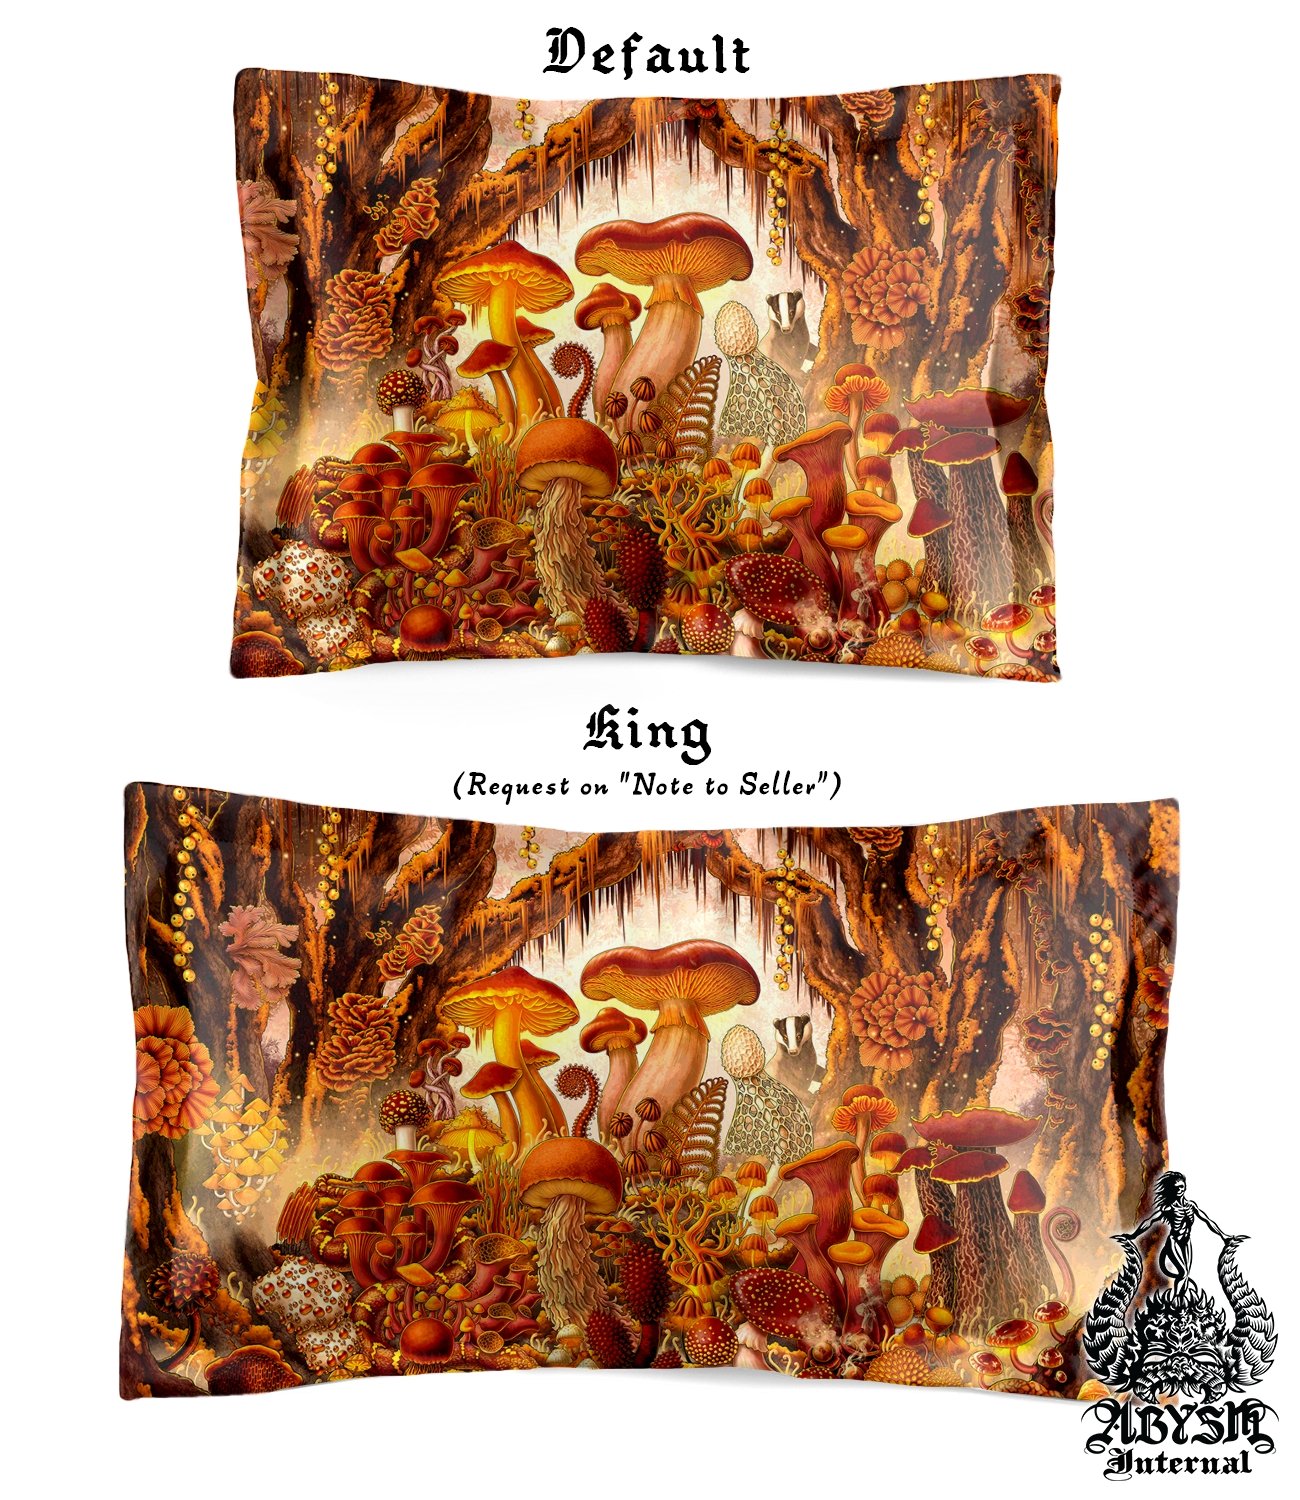 Mushrooms Bedding Set, Comforter and Duvet, Kids Fantasy Bed Cover, Psychedelic Bedroom Decor, King, Queen and Twin Size - Magic Shrooms, Steampunk - Abysm Internal